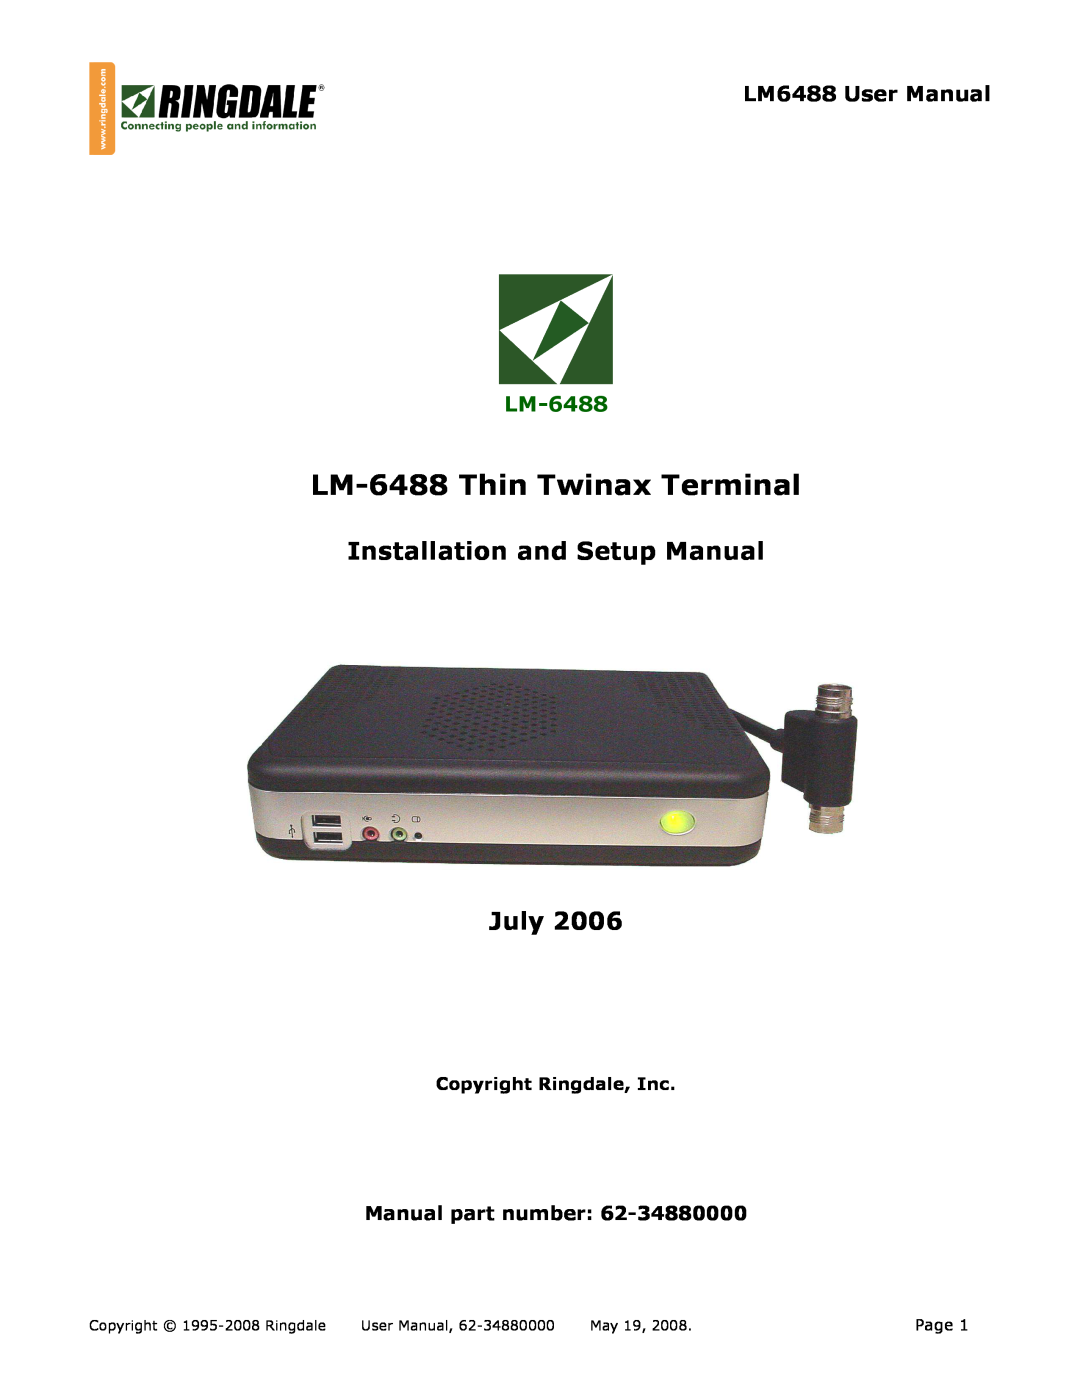 Ringdale user manual LM-6488 Thin Twinax Terminal, Installation and Setup Manual July, QuickLM-6488-ID, Page, May 19 